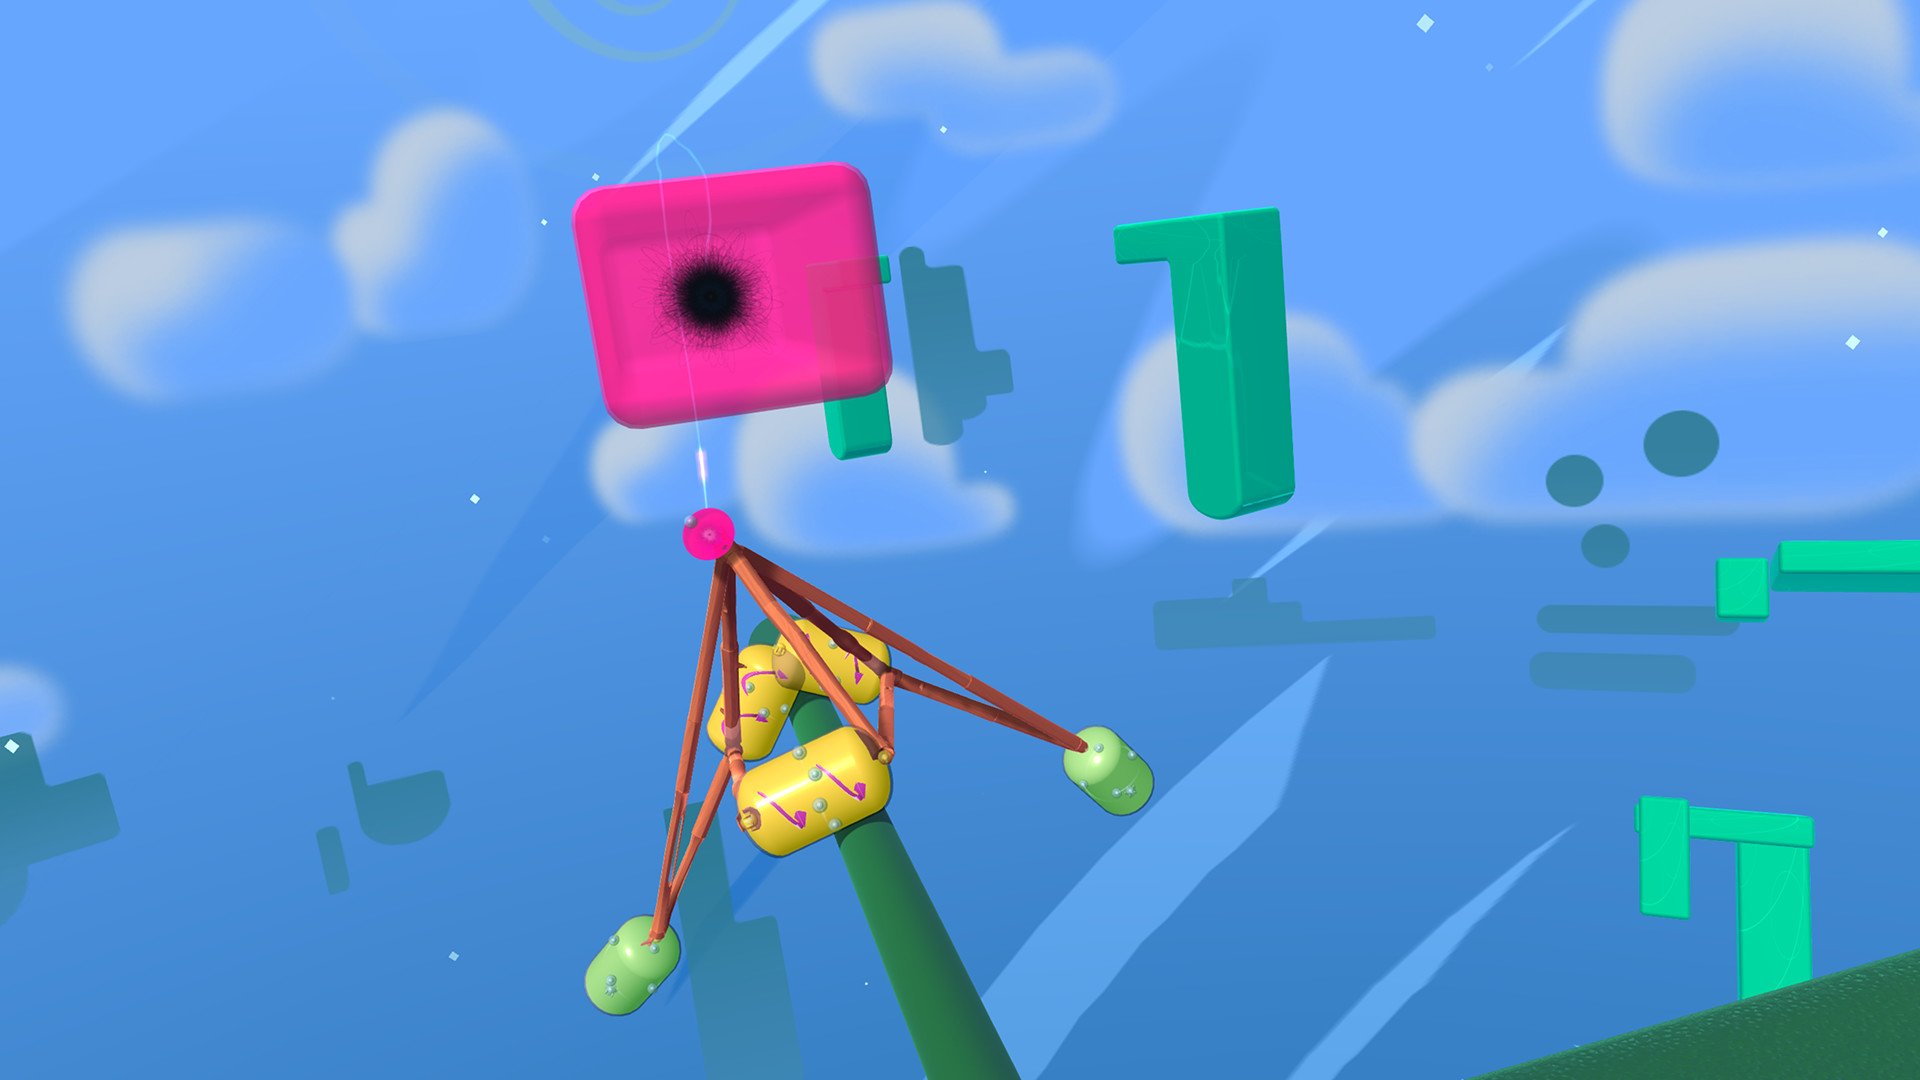 Fantastic Contraption on Steam